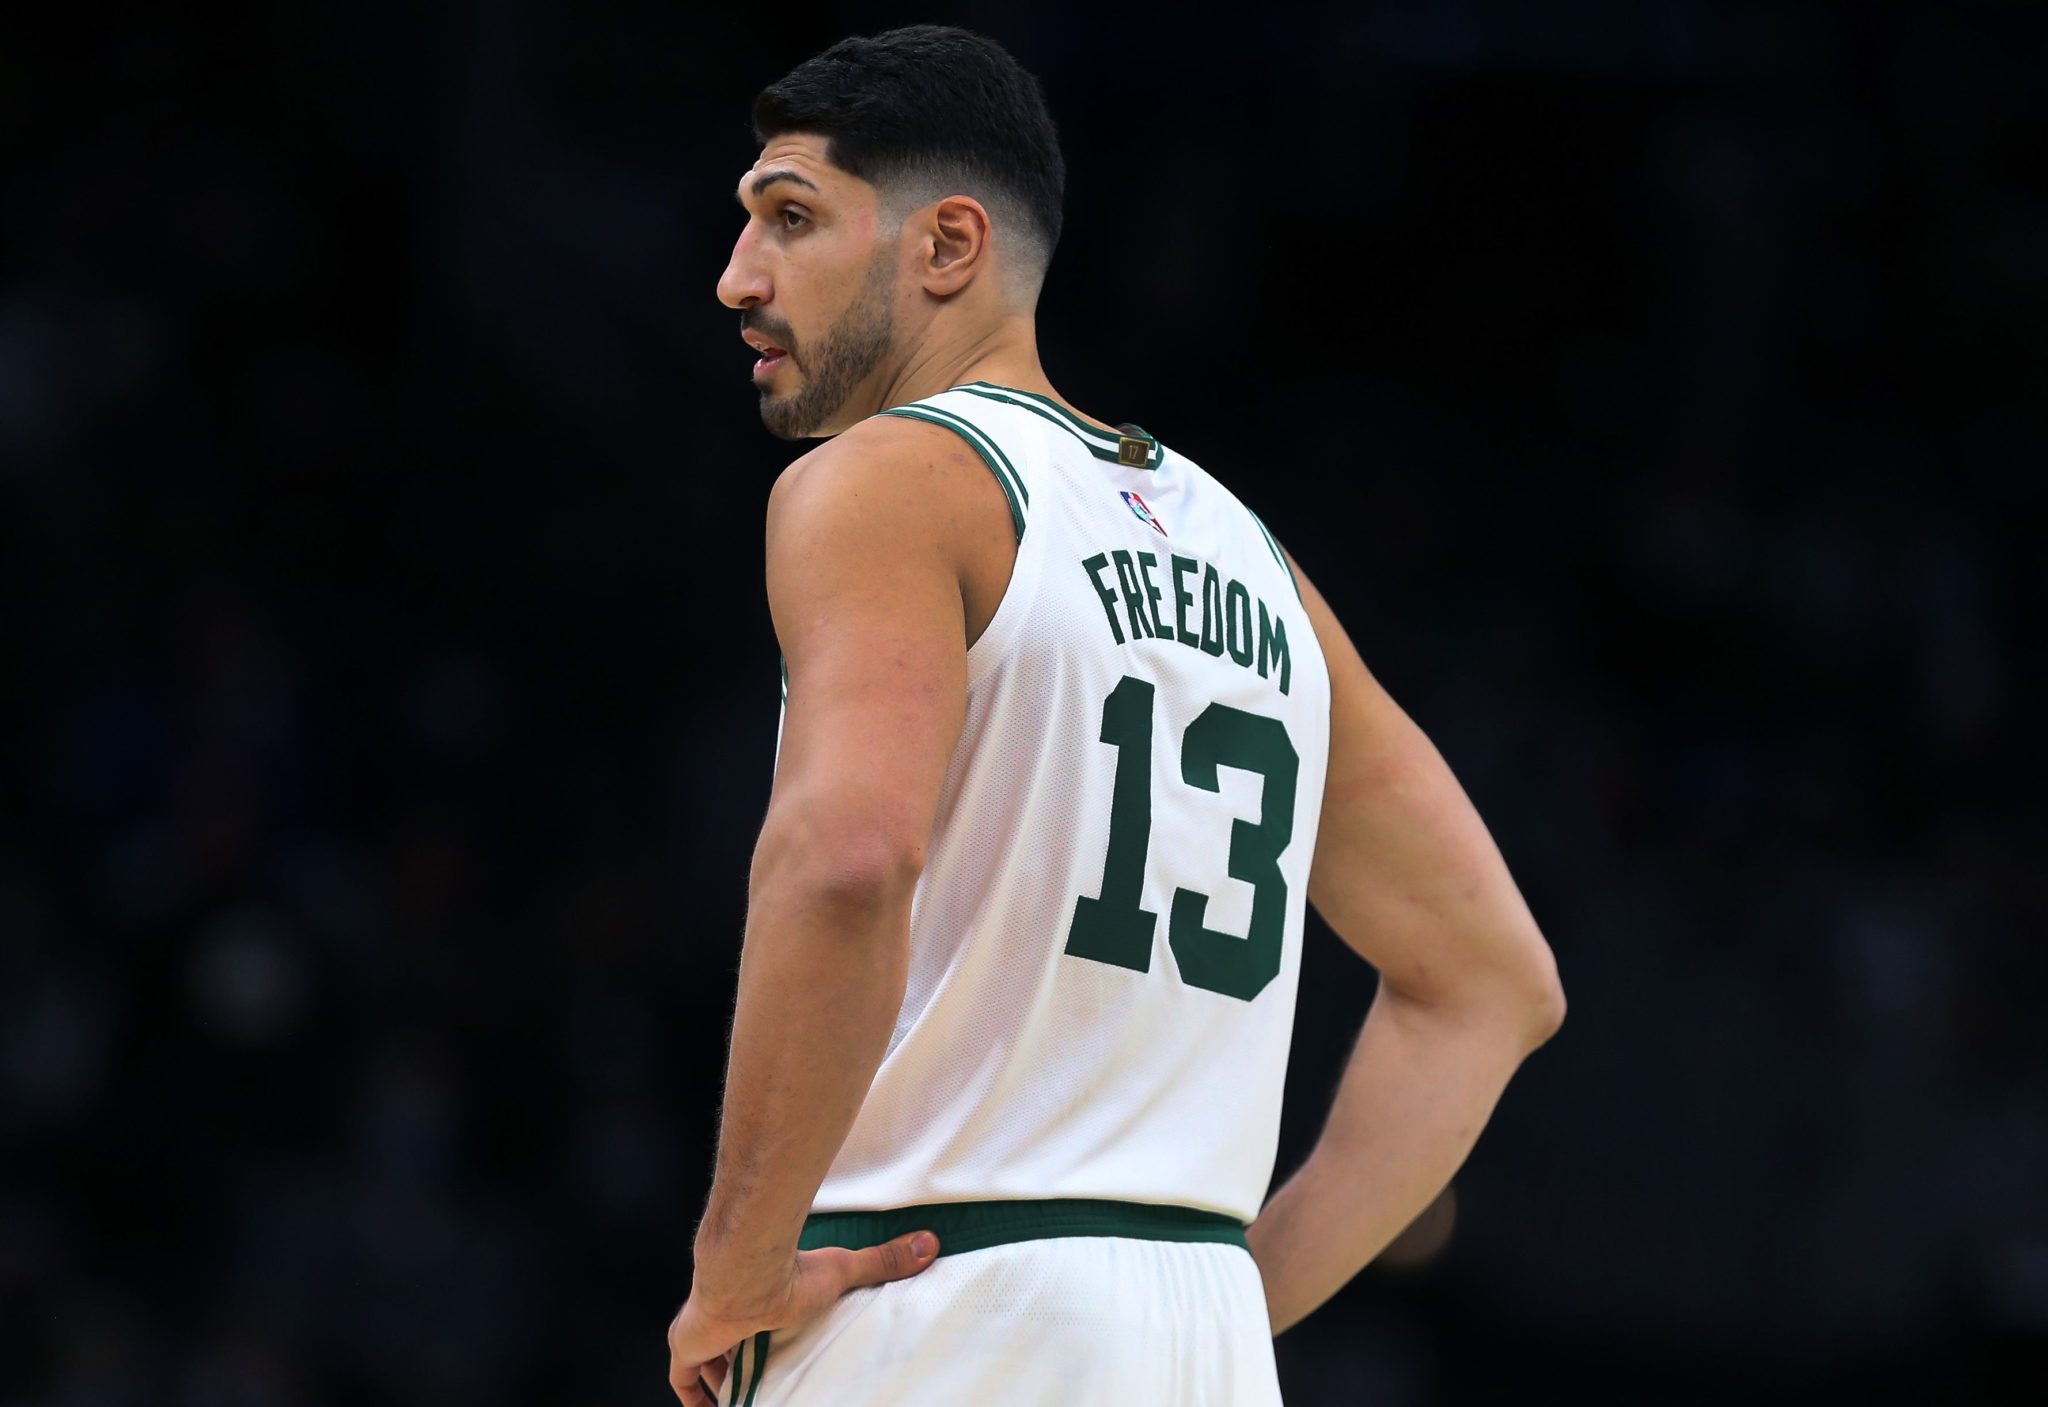 NBA Recounts All-Star Votes for Center and Activist Enes (Kanter) Freedom